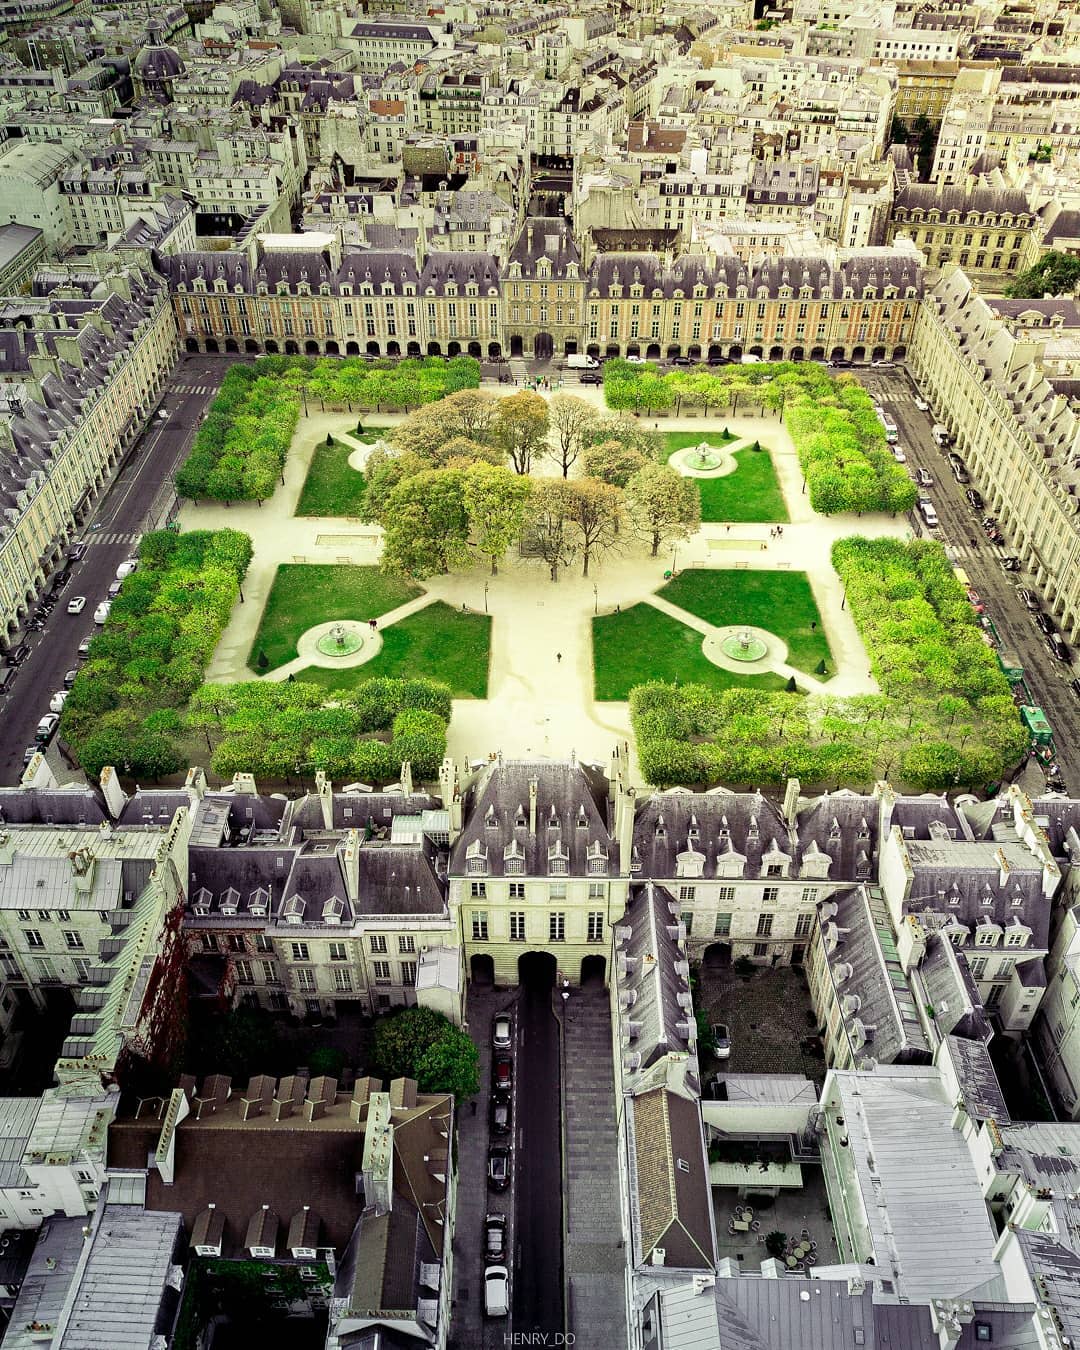 Place des Vosges, the oldest planned square in Paris, France, originally built in early 17th century.